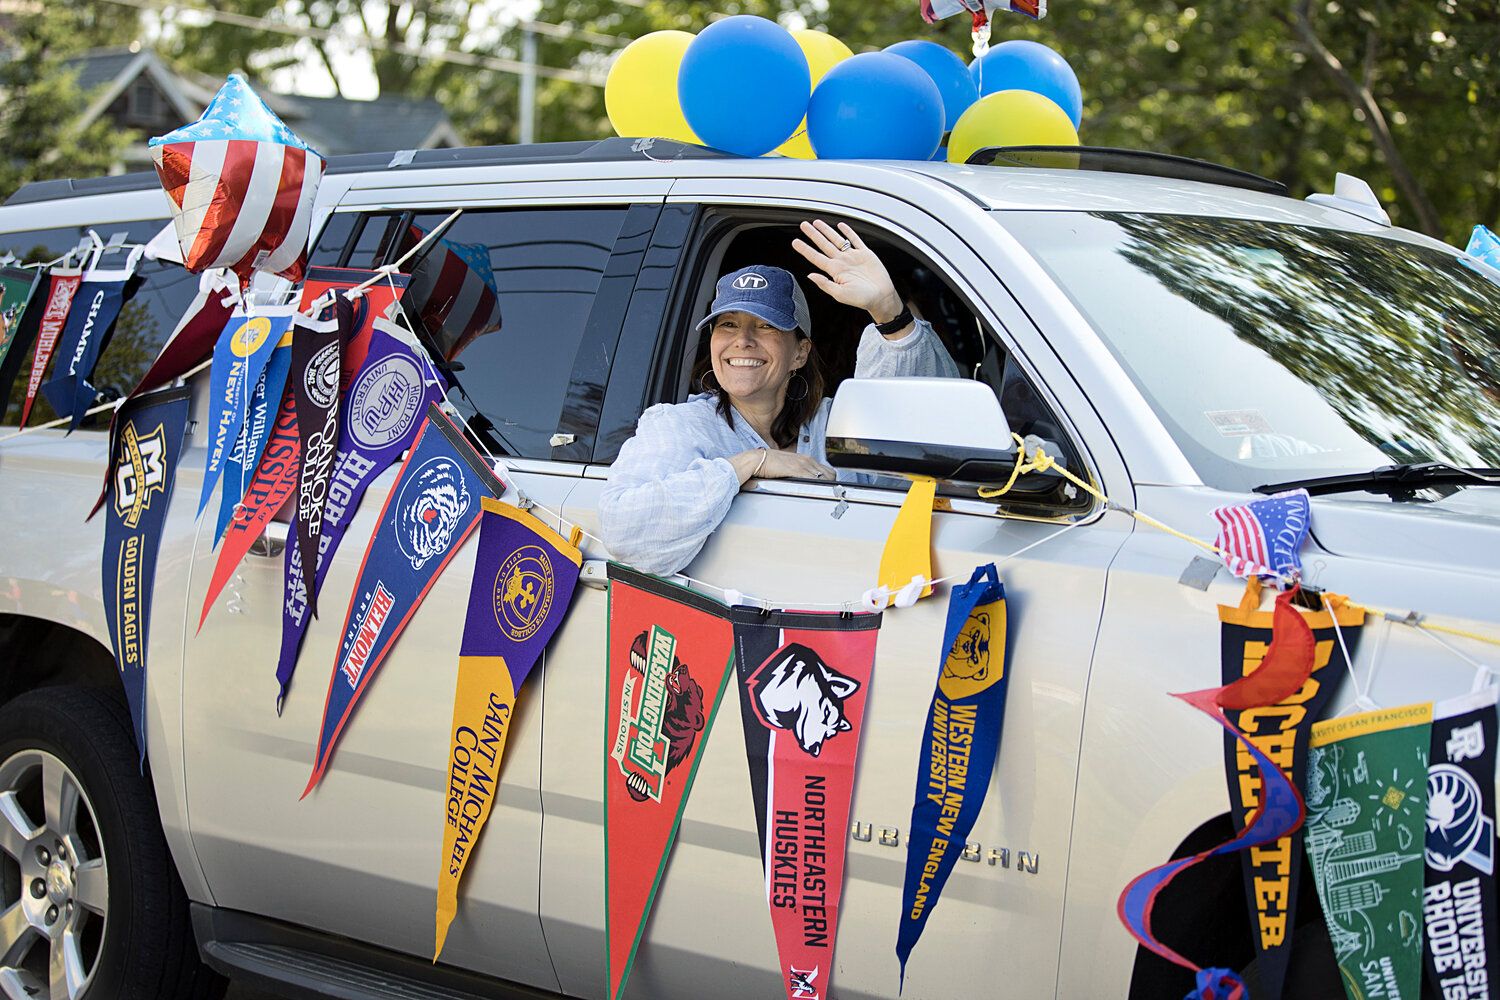 A member of the Barrington Education Foundation smiles and waves as she rides along the parade route.